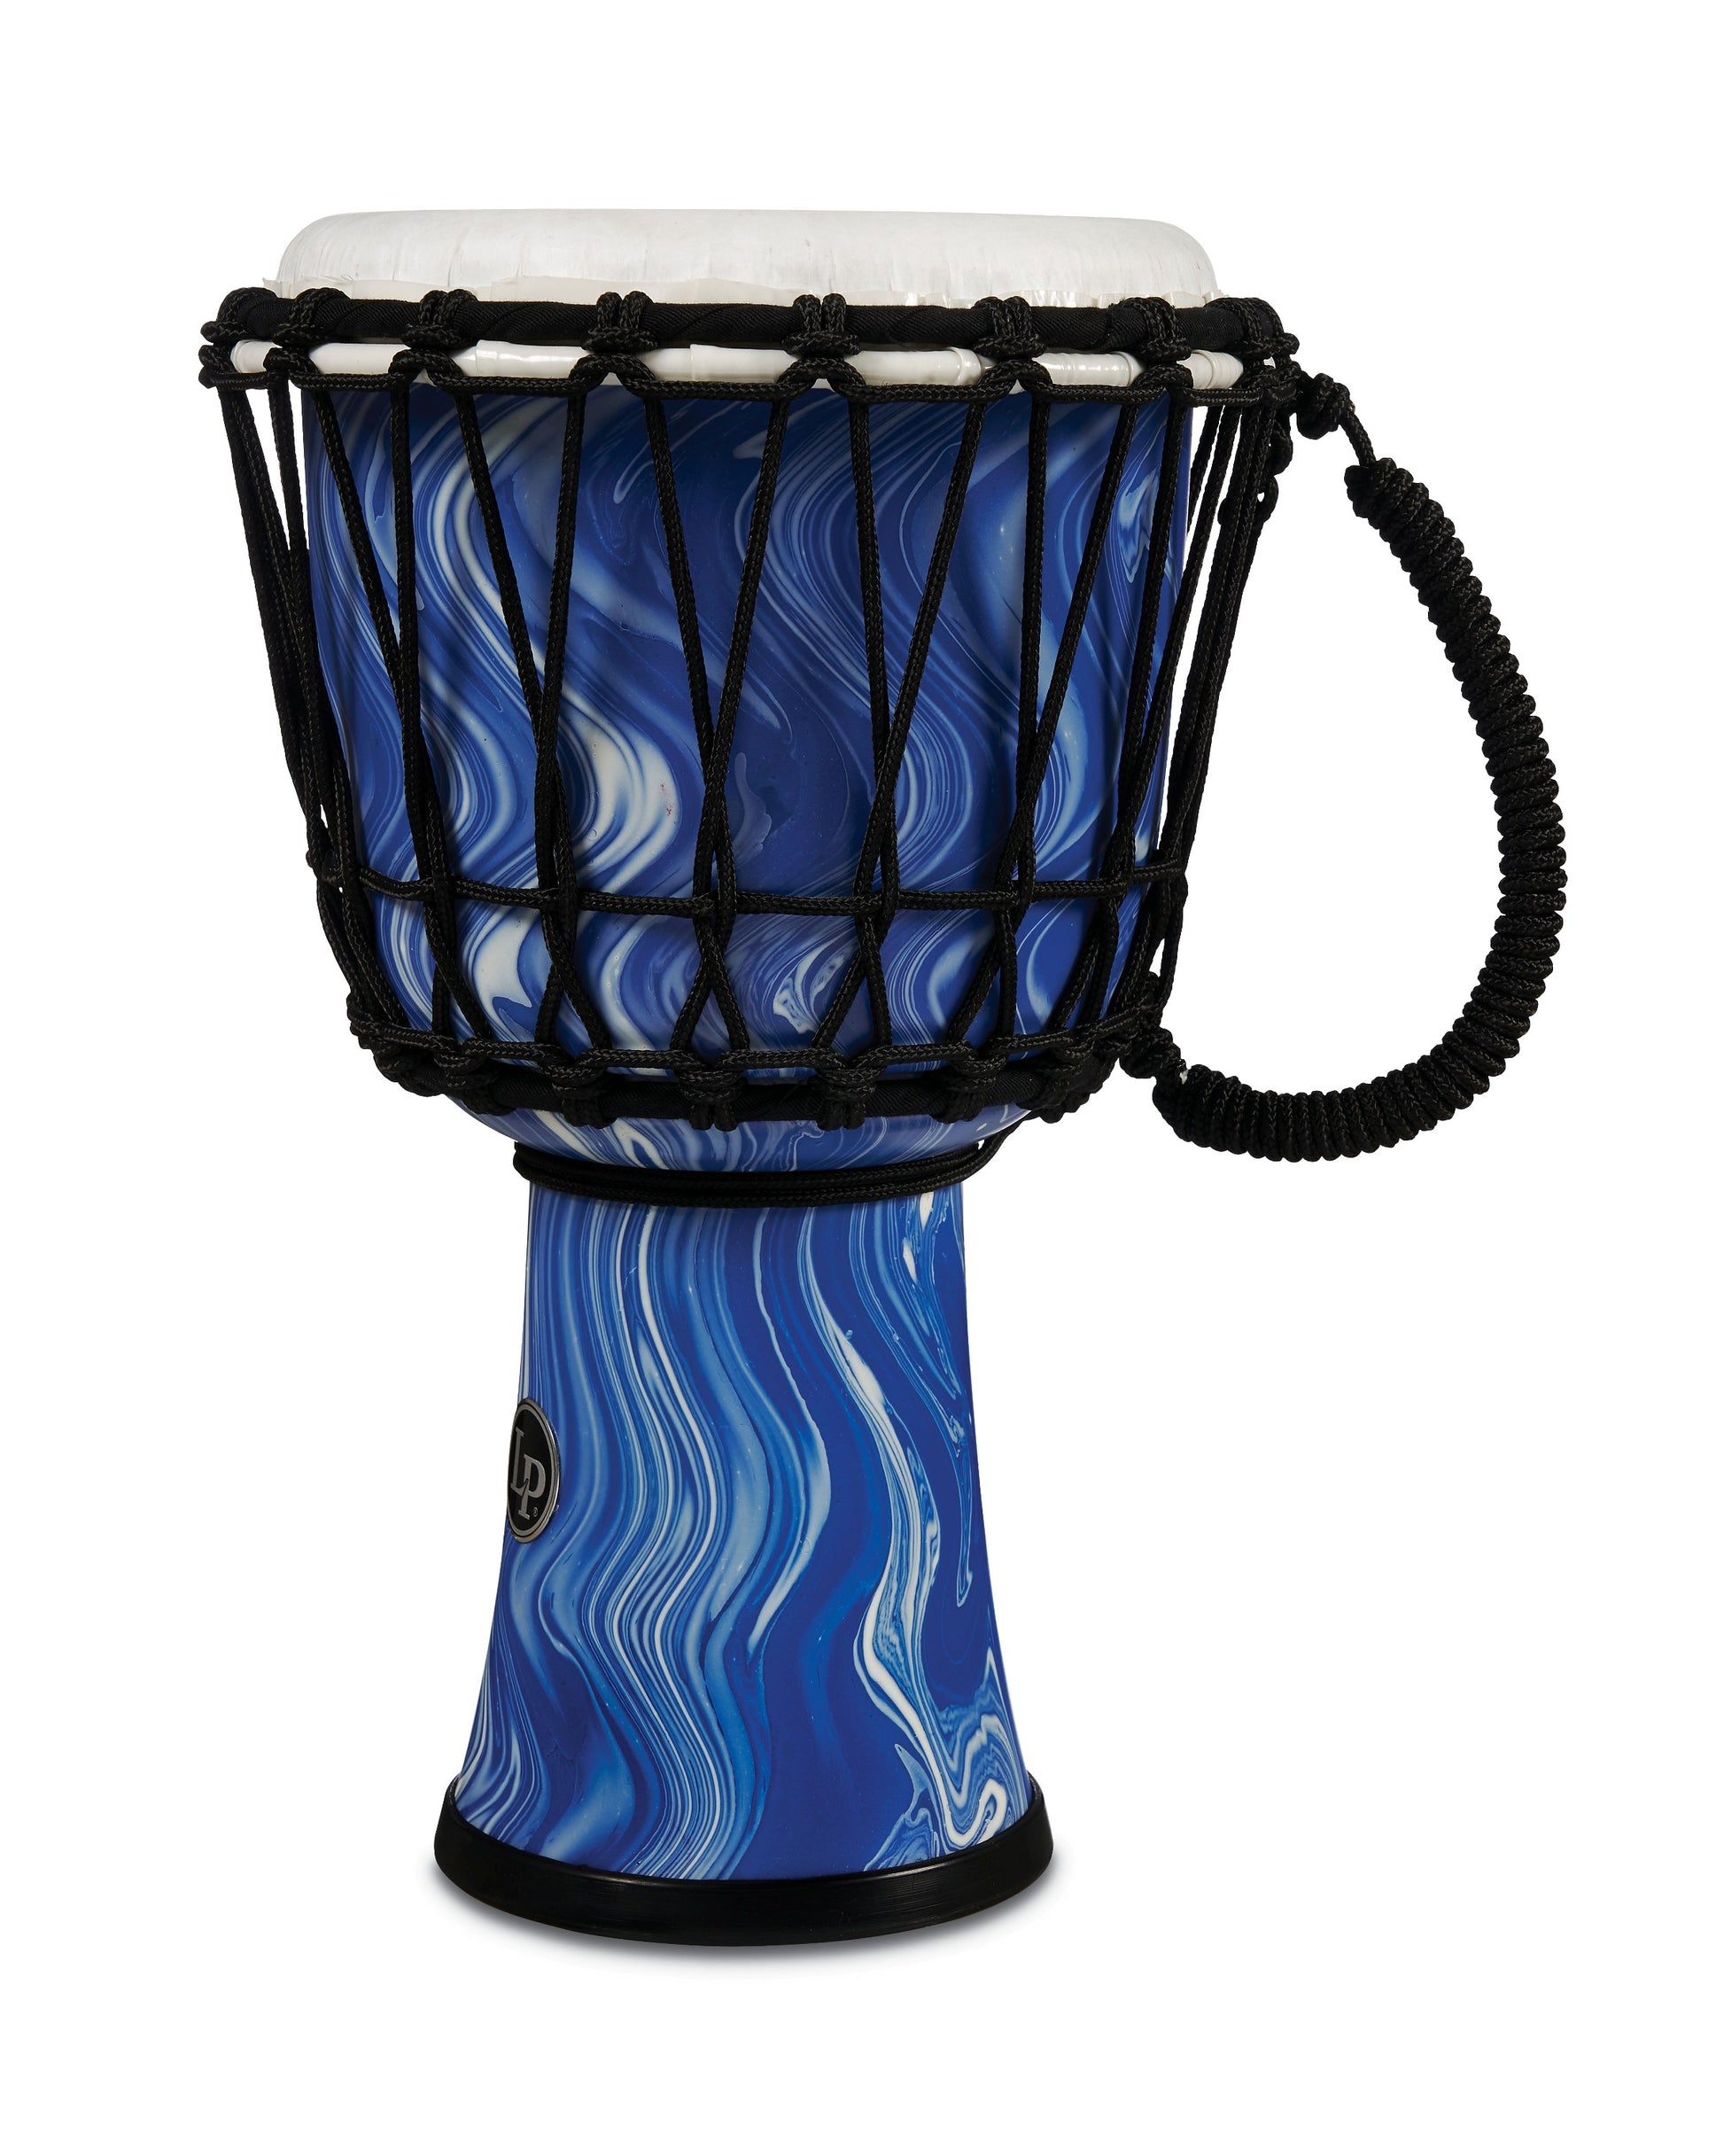 Latin Percussion 10-inch Rope Tuned Circle Djembe with Perfect-Pitch head - Blue Marble - LP2010-BM - Poppa's Music 